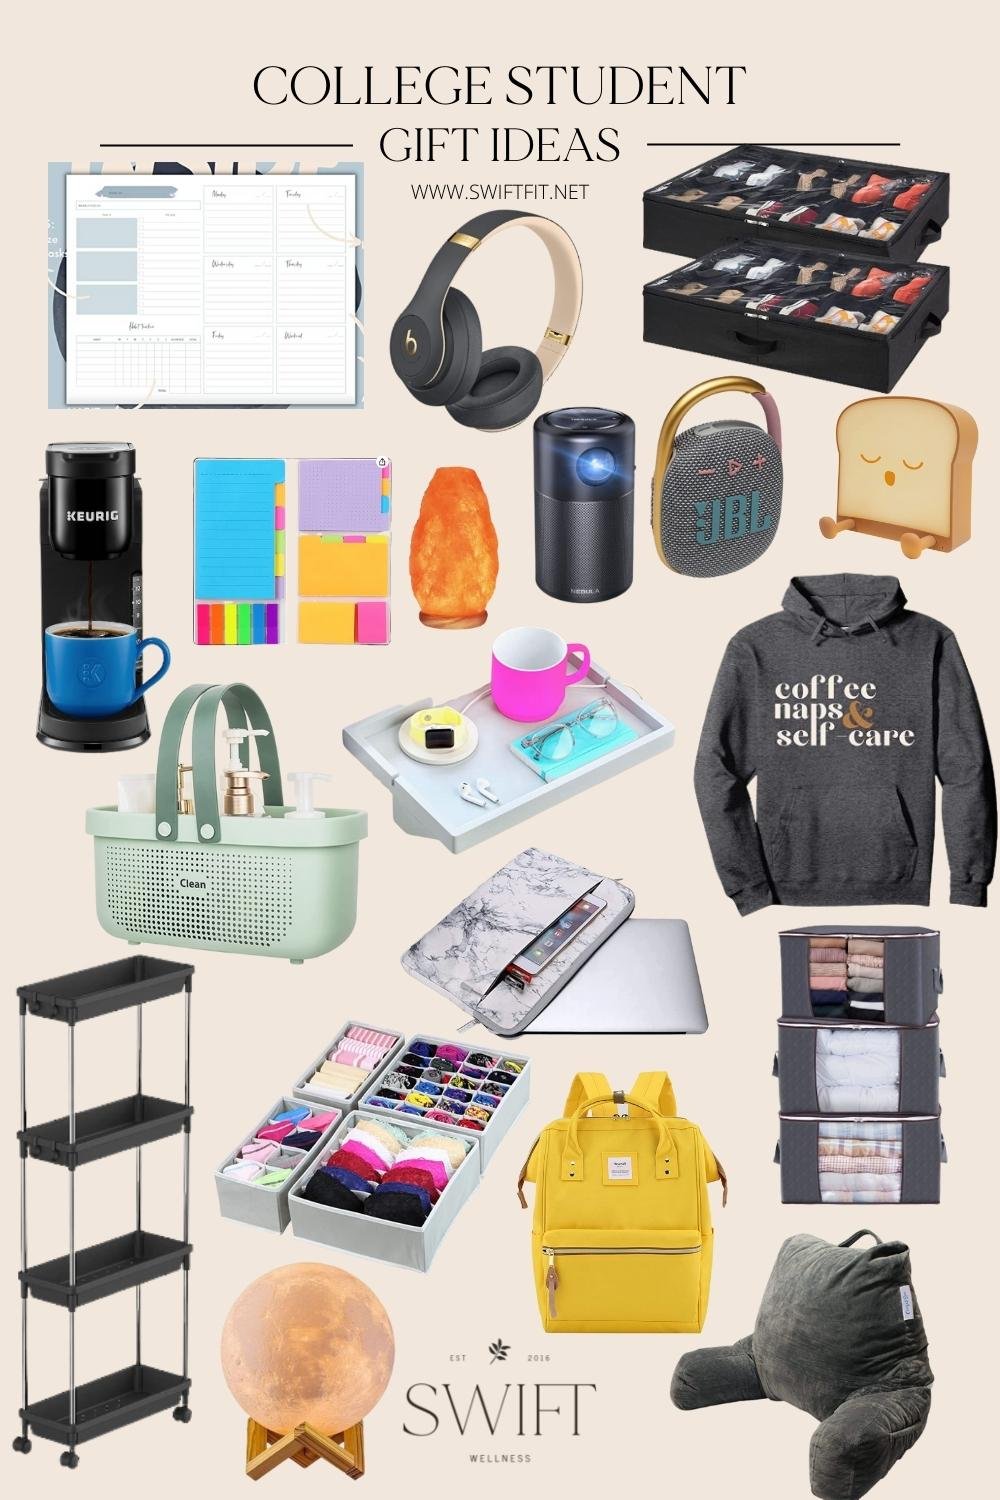 38 EndofYear Student Gifts That Wont Break the Bank